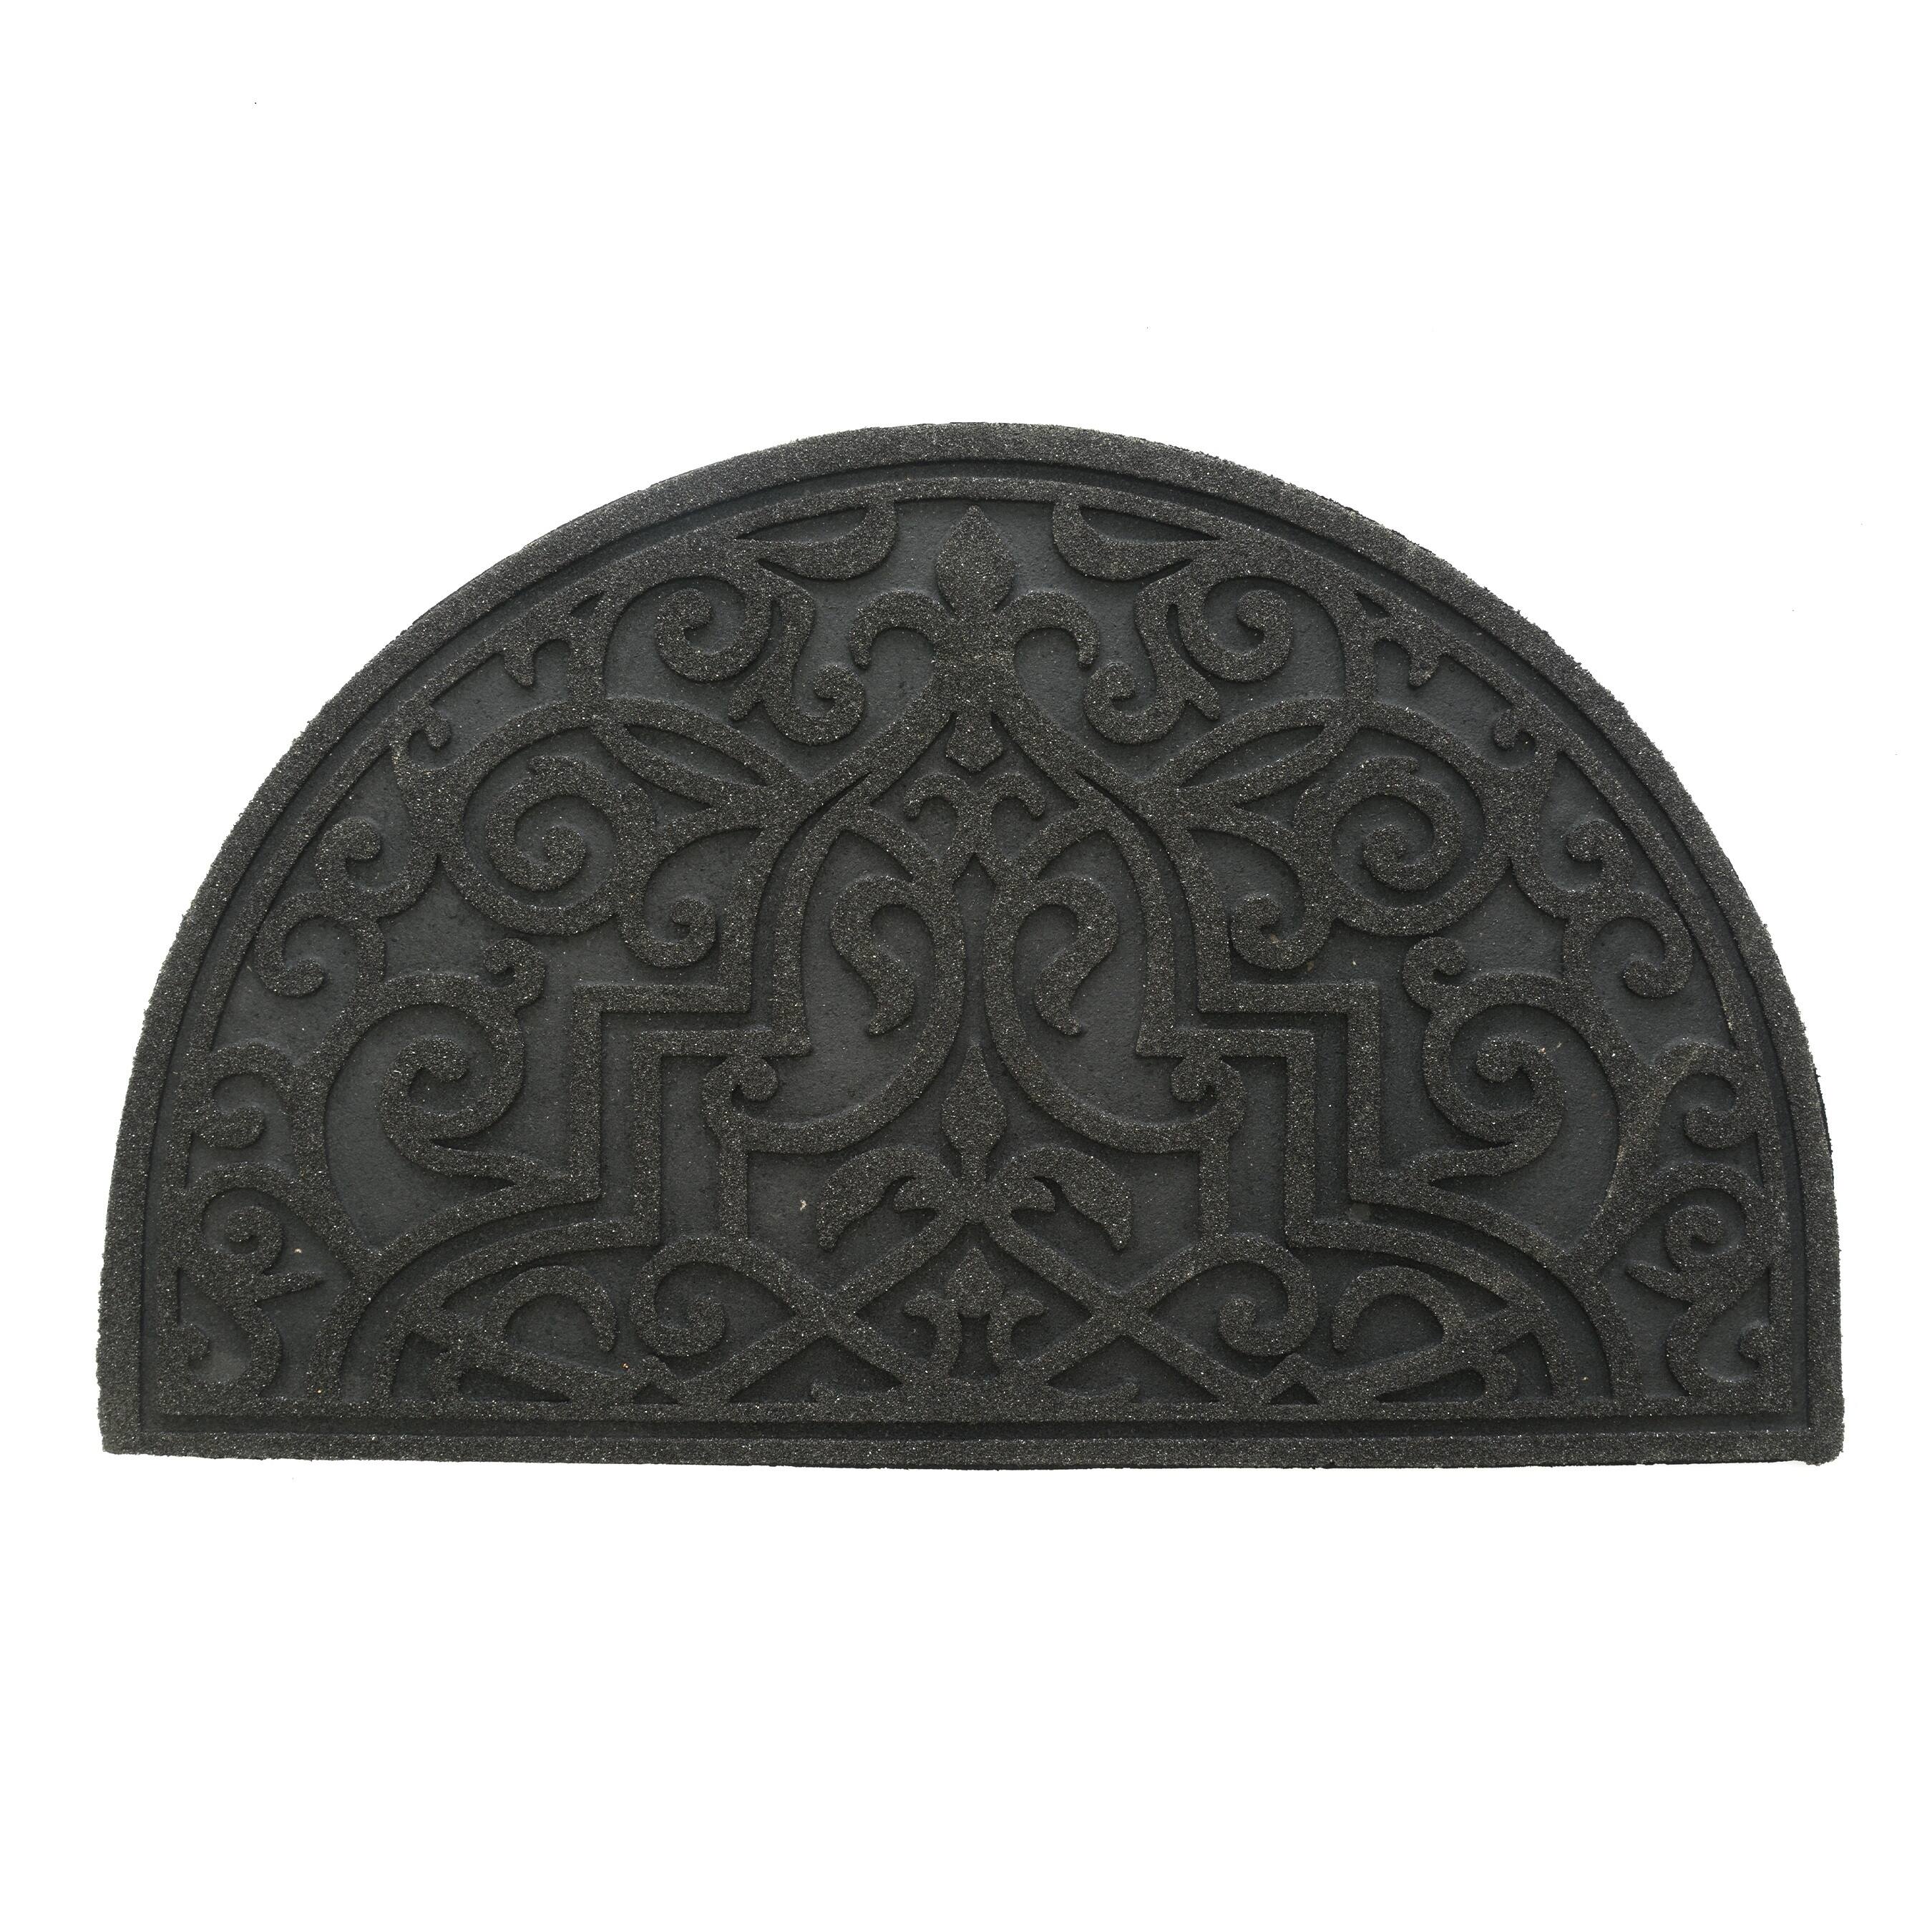 Stephan Roberts Gibraltar Scroll Slice Stone Recycled Rubber Doormat 18" x 30"